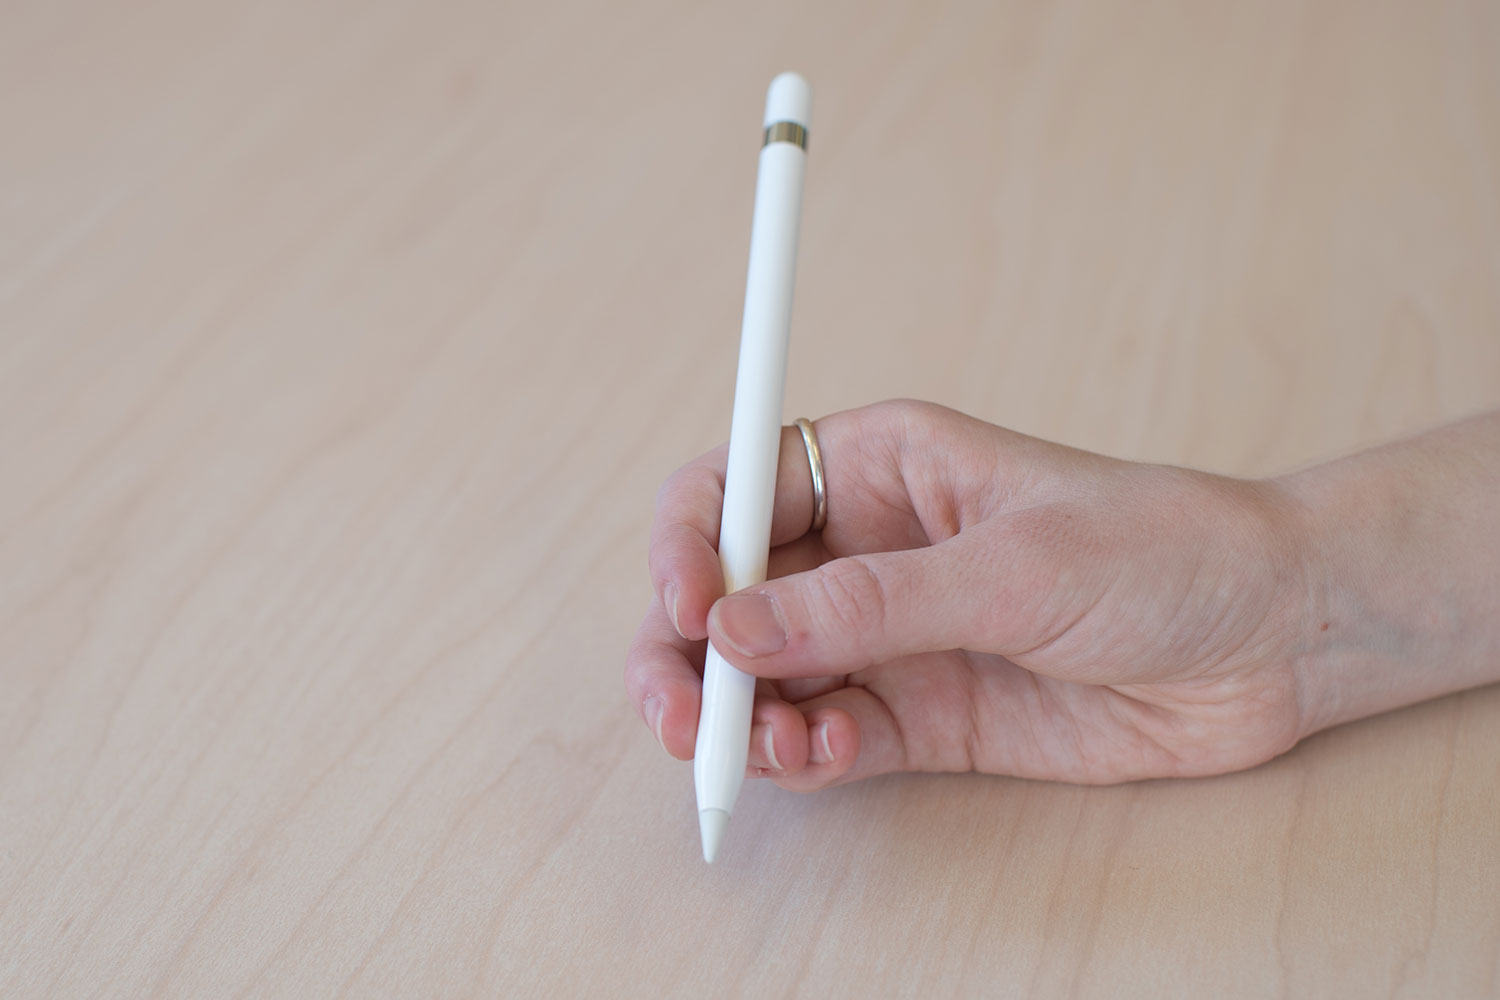 Apple Pencil USB-C review: 7 things that will surprise you about it